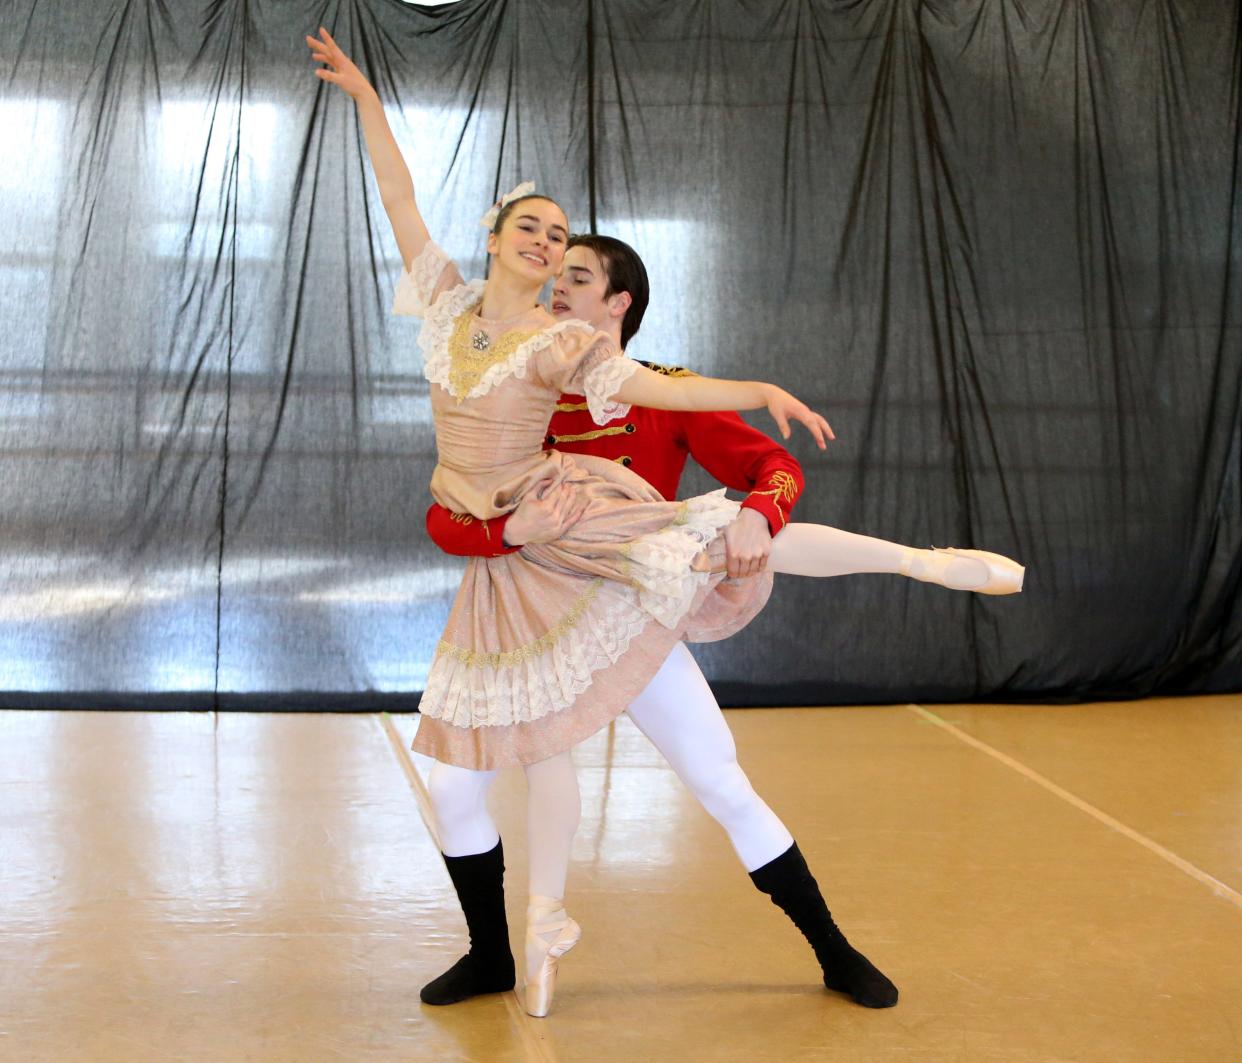 Caitlyn Gongwer, 15, an understudy for the part of Marie, and Fred Stuckwisch, 17, as The Nutcracker, rehearse the snow scene in the Southold Dance Company's production of "The Nutcracker" on Nov. 21, 2022, at the Colfax Cultural Center in South Bend.